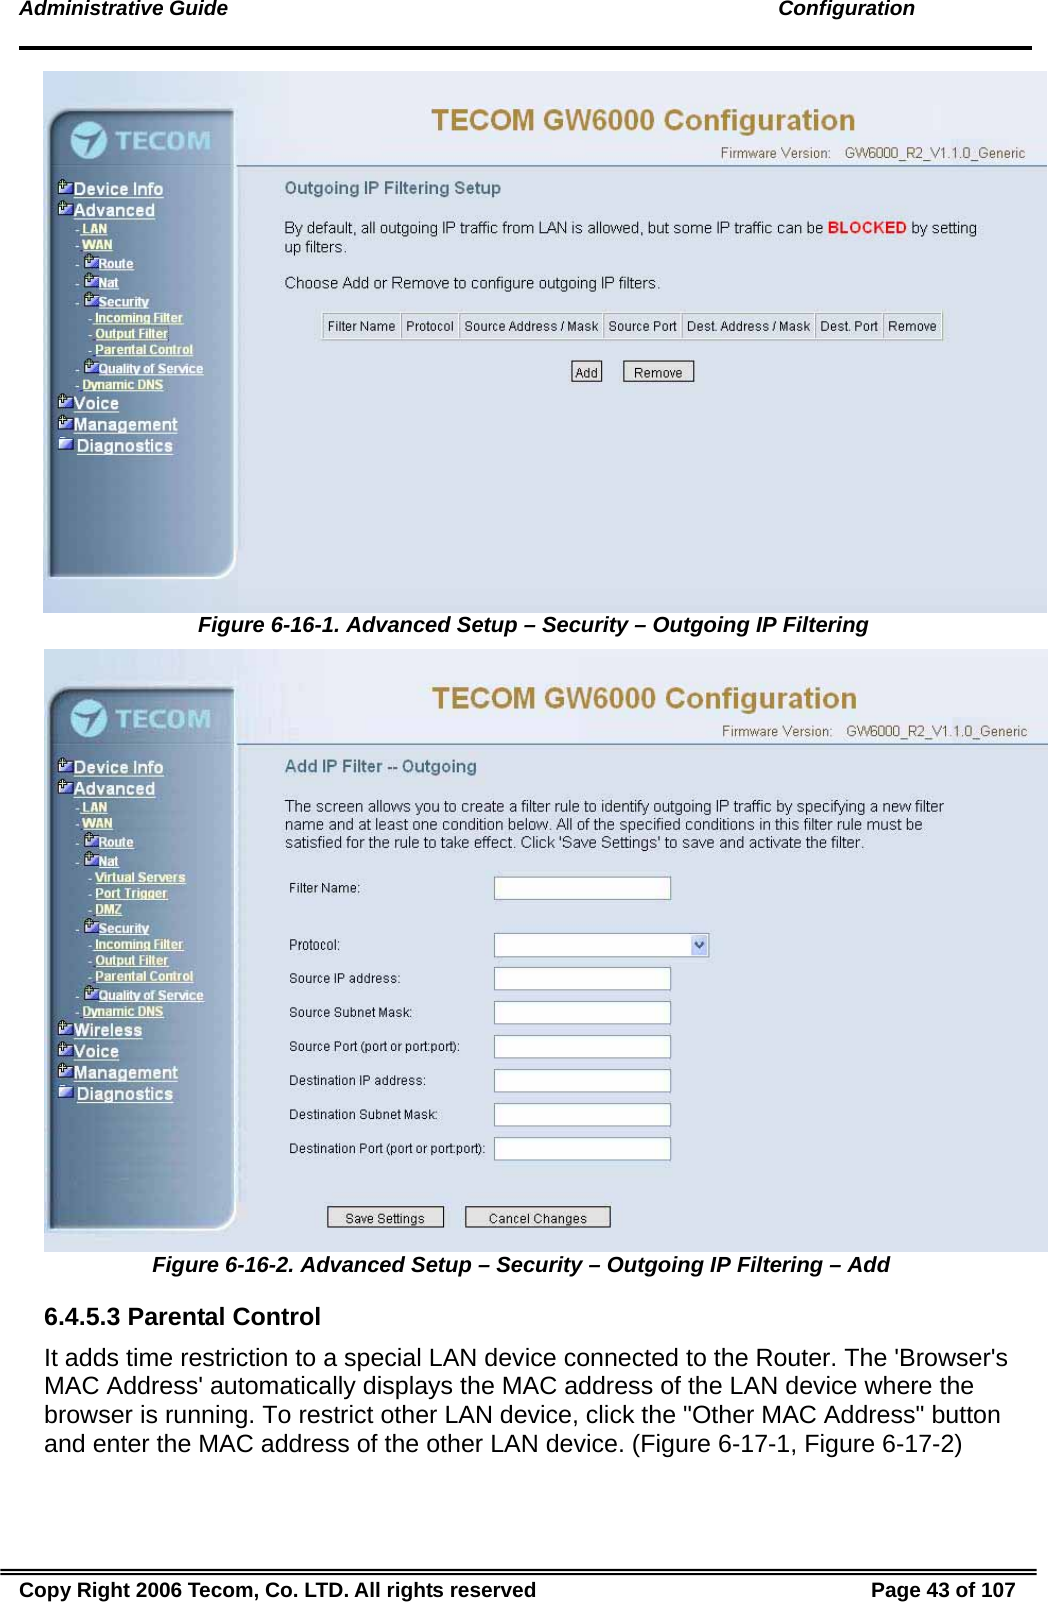 Administrative Guide                                                                                               Configuration  Figure 6-16-1. Advanced Setup – Security – Outgoing IP Filtering  Figure 6-16-2. Advanced Setup – Security – Outgoing IP Filtering – Add 6.4.5.3 Parental Control It adds time restriction to a special LAN device connected to the Router. The &apos;Browser&apos;s MAC Address&apos; automatically displays the MAC address of the LAN device where the browser is running. To restrict other LAN device, click the &quot;Other MAC Address&quot; button and enter the MAC address of the other LAN device. (Figure 6-17-1, Figure 6-17-2) Copy Right 2006 Tecom, Co. LTD. All rights reserved  Page 43 of 107 